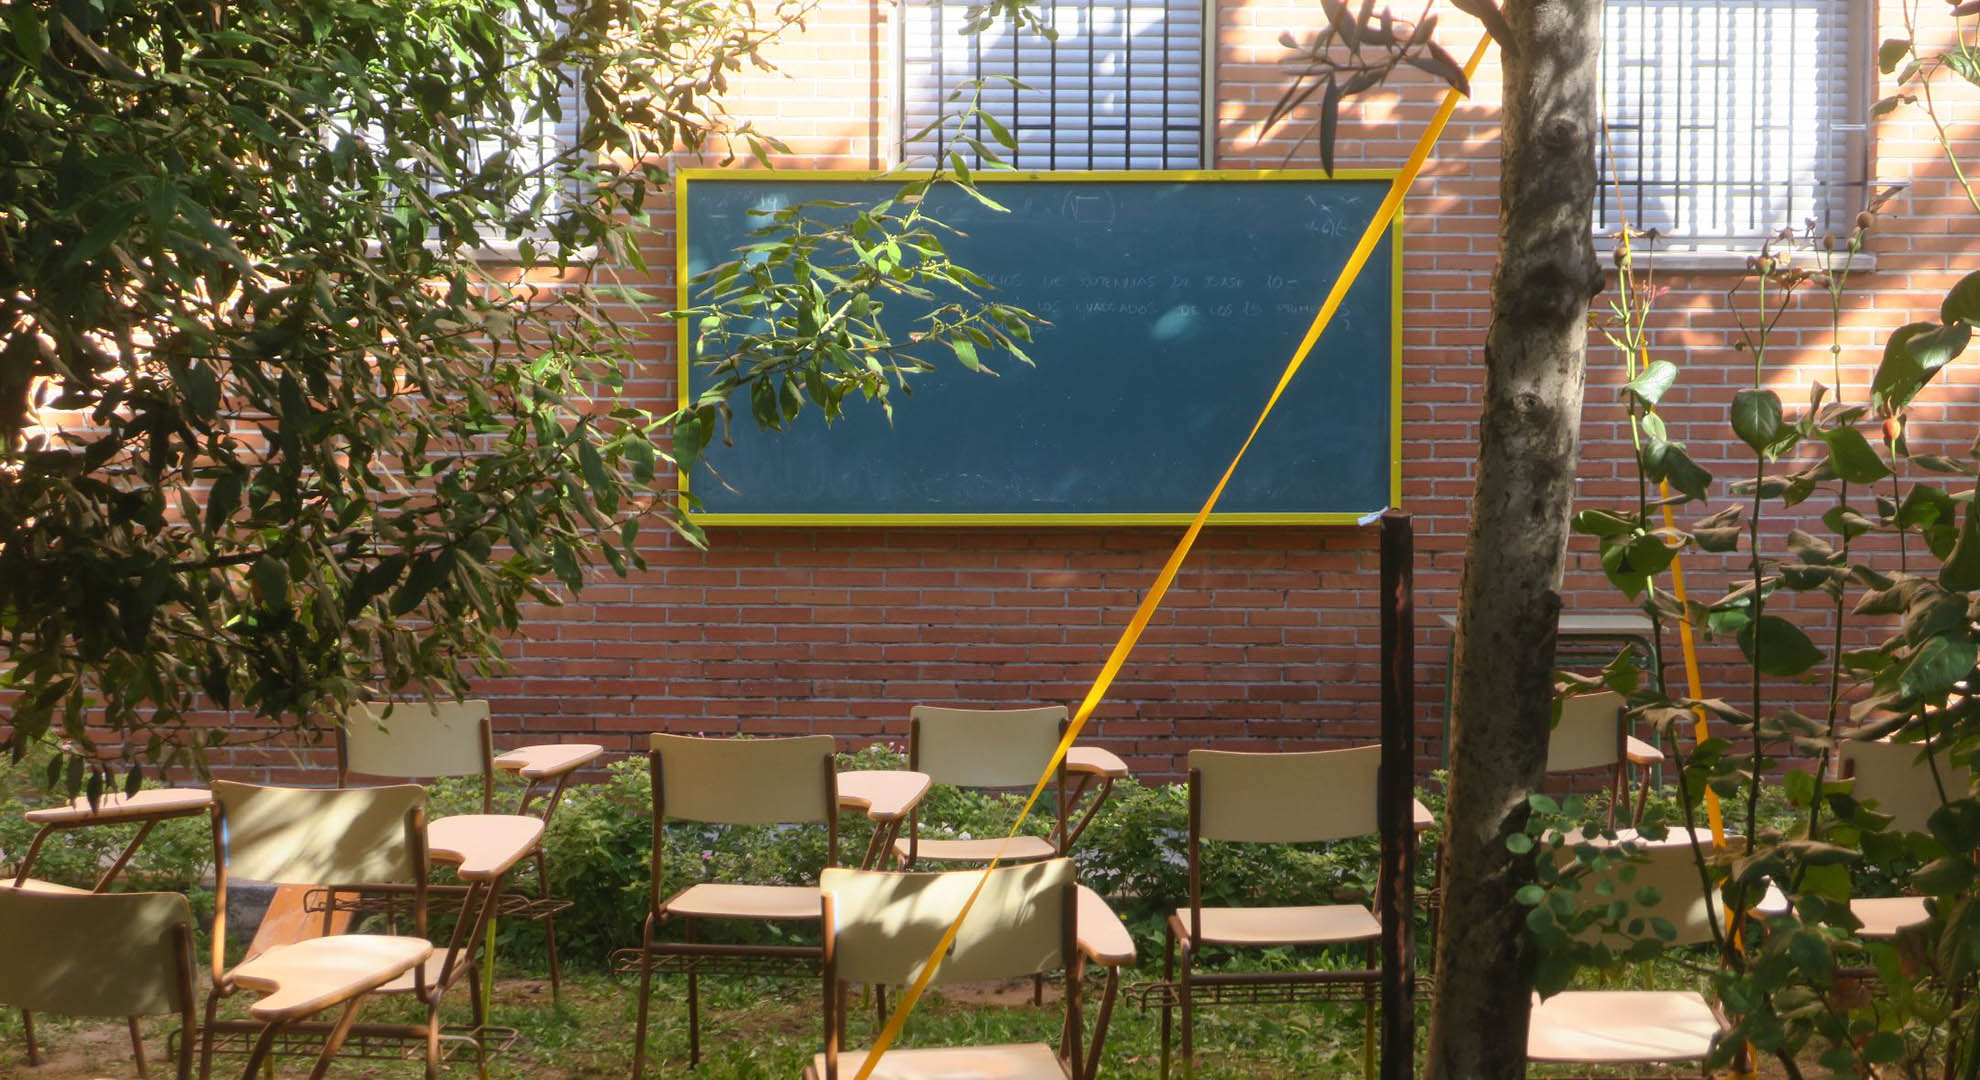 A classroom in a playground.